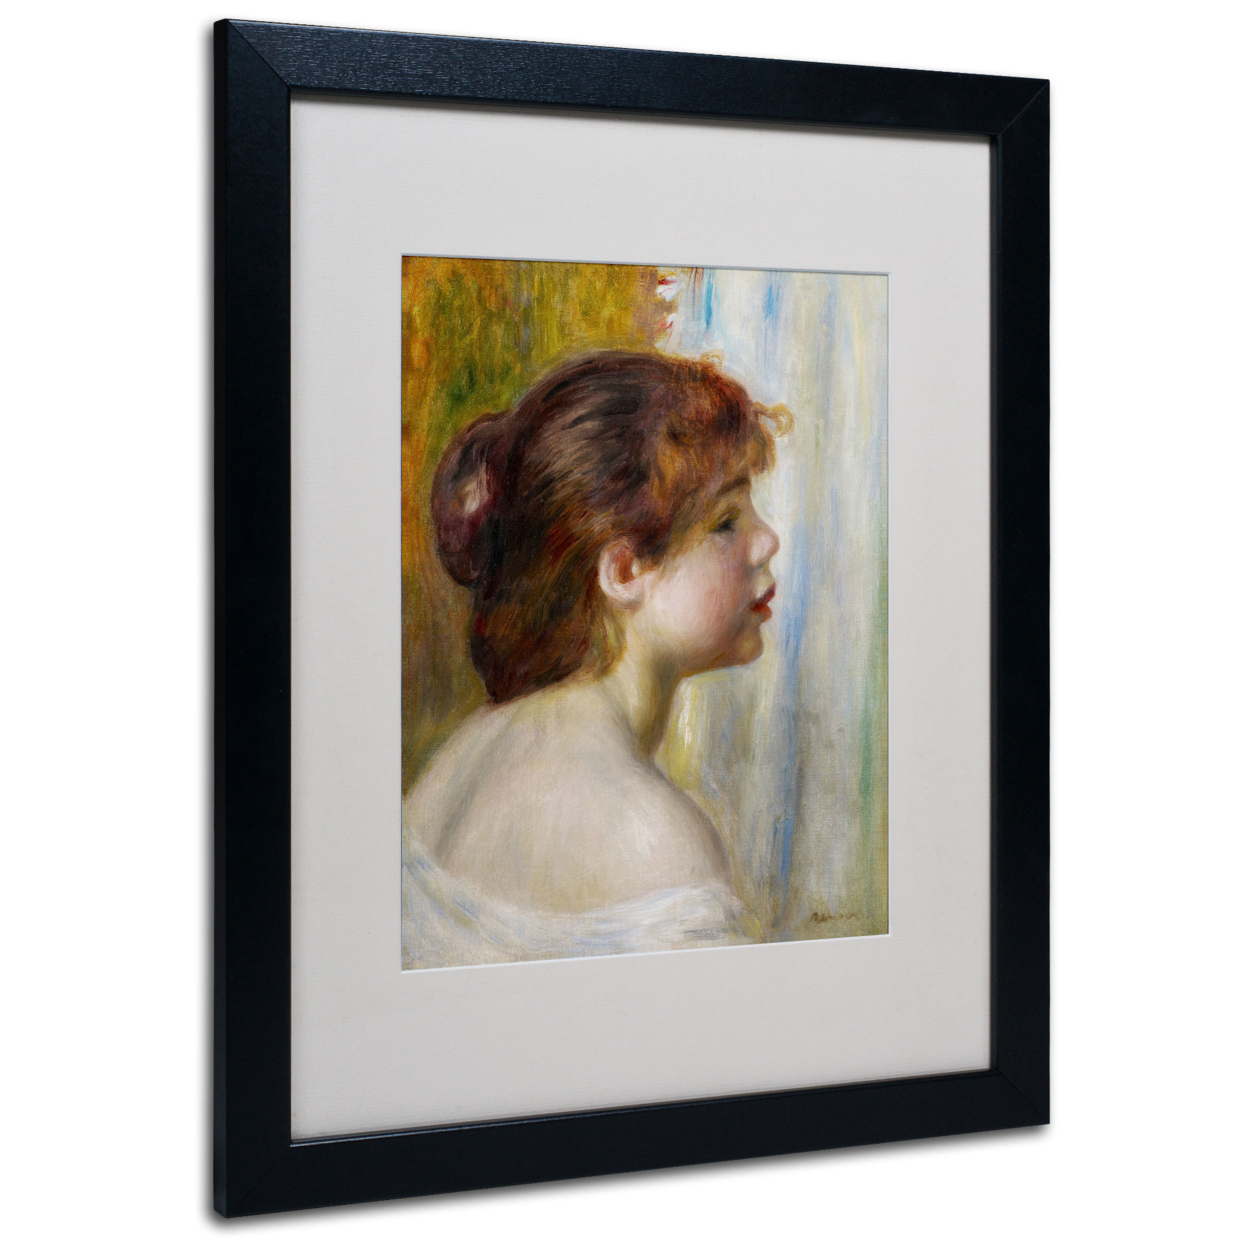 Pierre Renoir 'Head Of A Young Woman' Black Wooden Framed Art 18 X 22 Inches